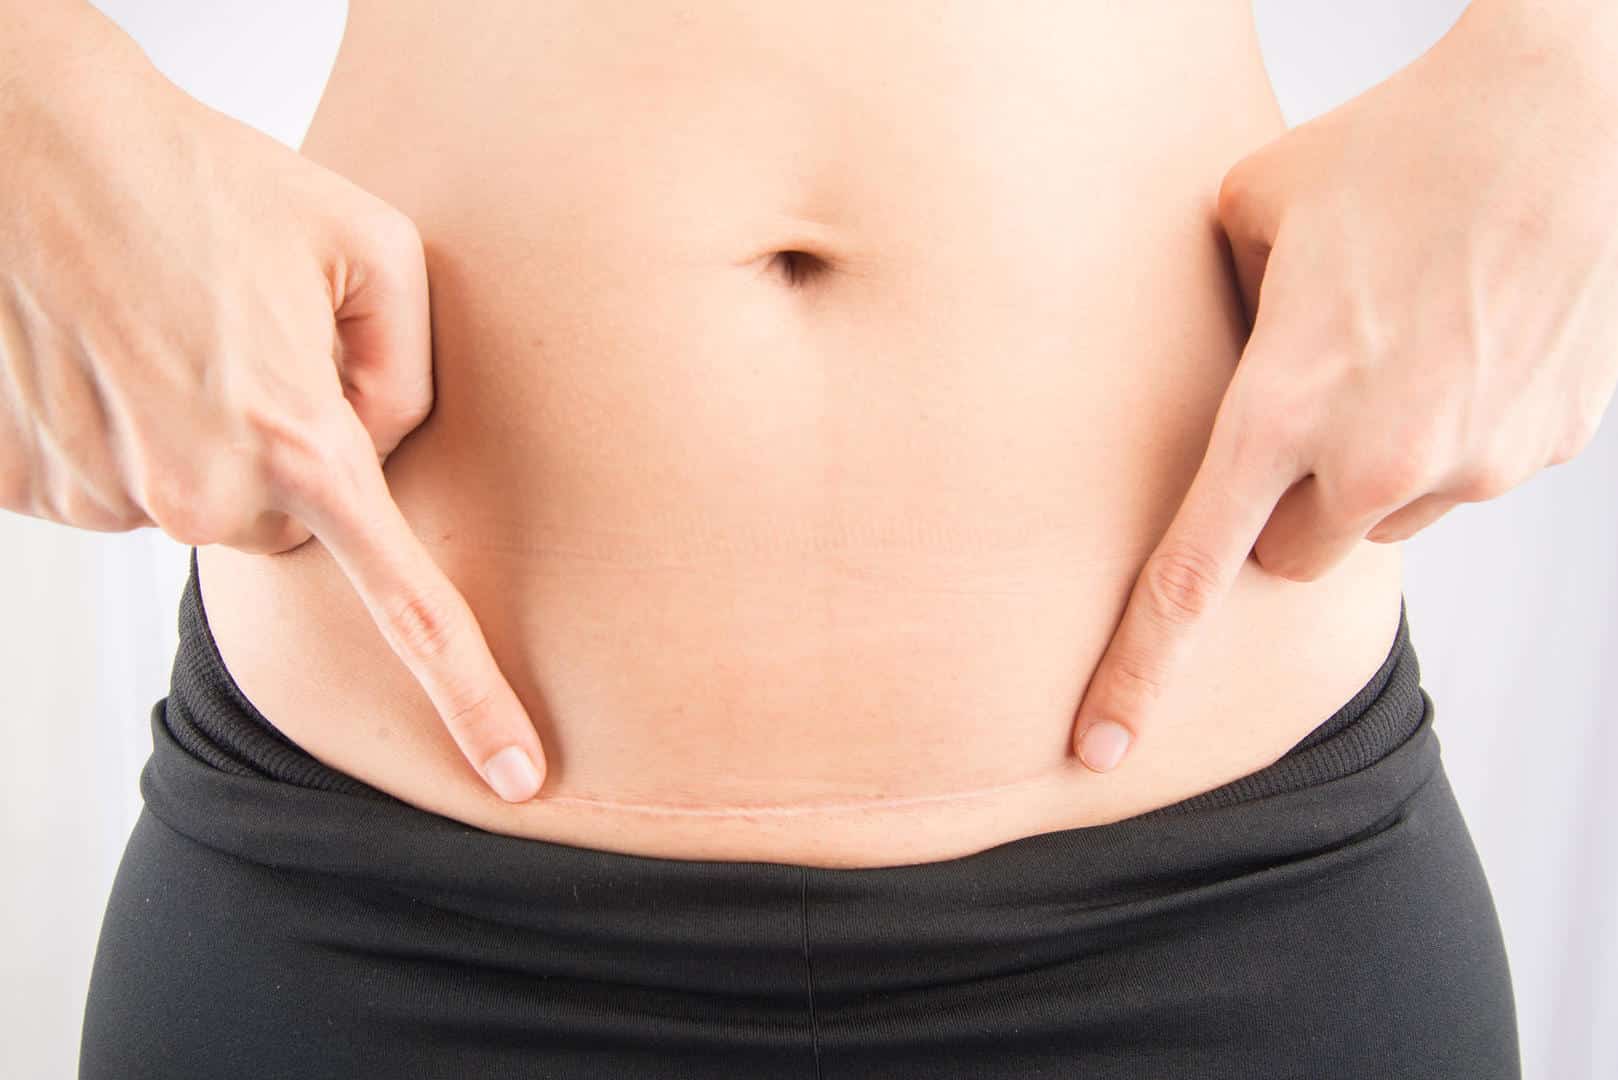 C-SECTION SCAR PHYSIOTHERAPY TREATMENT & REHABILITATION IN LONDON WITH OUR  WOMEN'S HEALTH PHYSIOTHERAPISTS, AT HOME OR AT THE PRACTICES IN BELGRAVIA,  CLAPHAM MONUMENT MOORGATE. C-SECTION SCAR MASSAGES & PAIN MANAGEMENT WITH  OUR